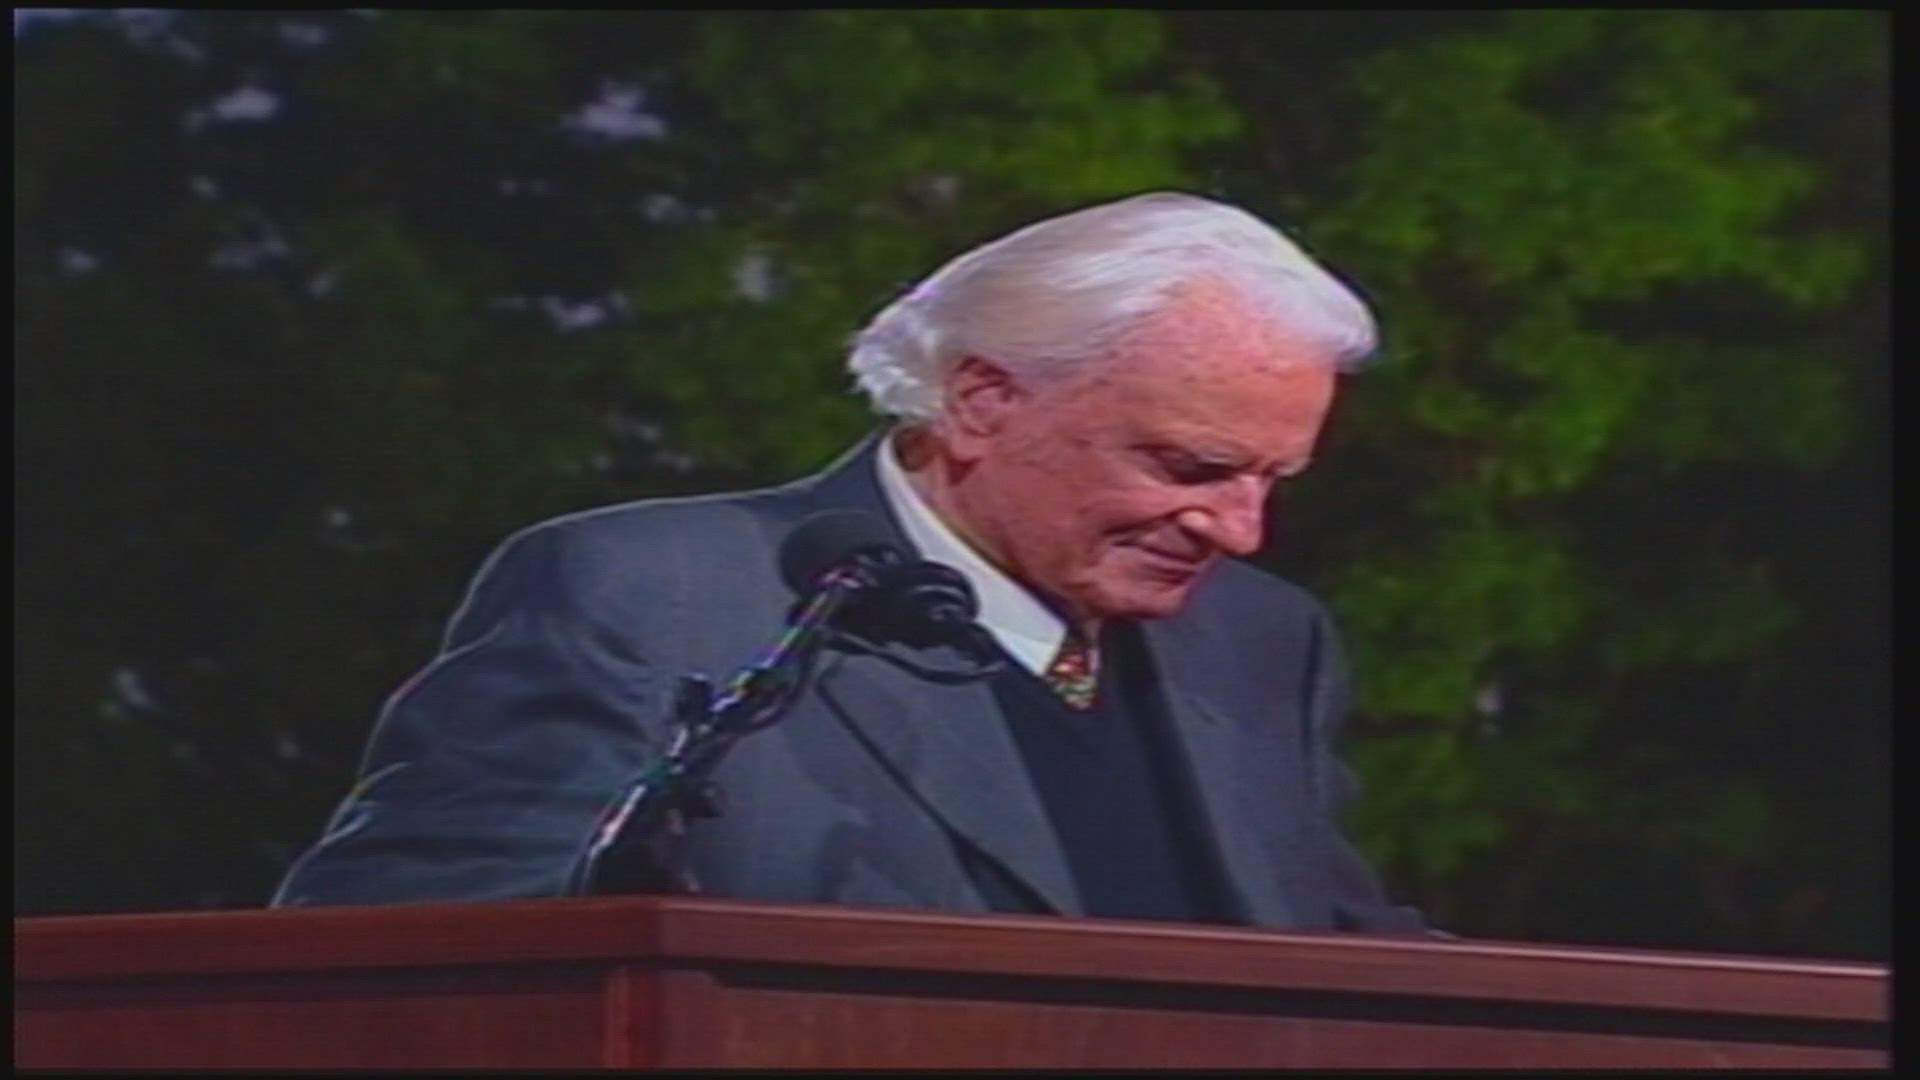 On this day in 2005, the Reverend Billy Graham led his last American crusade.